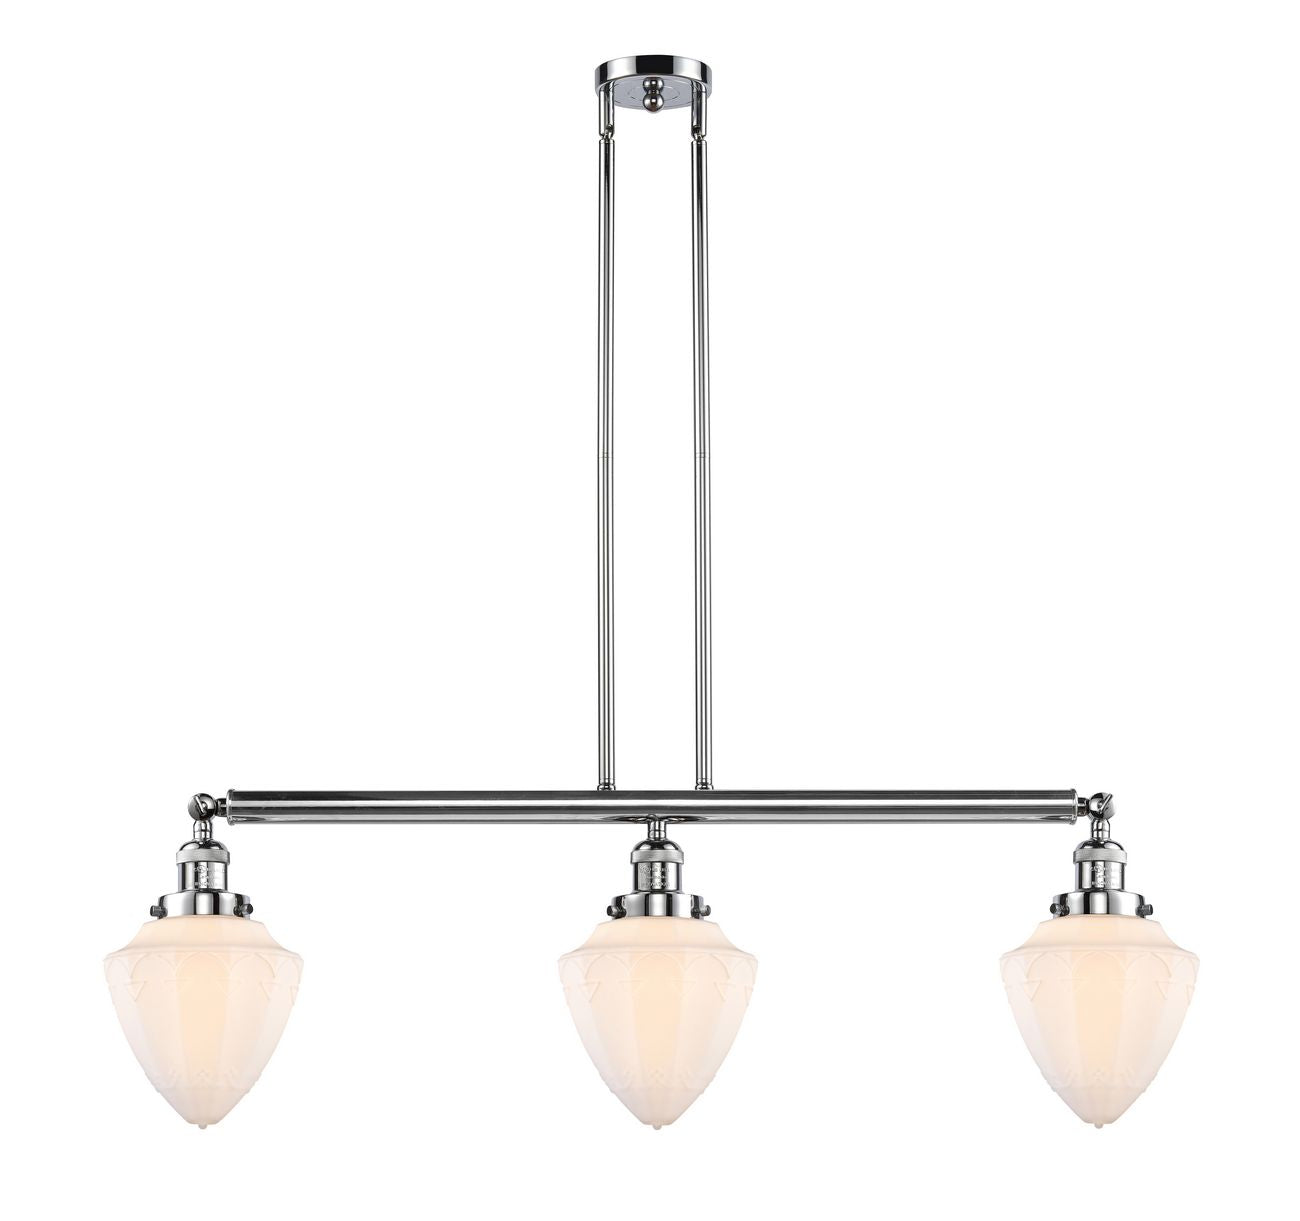 213-PC-G661-7 3-Light 38" Polished Chrome Island Light - Matte White Cased Small Bullet Glass - LED Bulb - Dimmensions: 38 x 7 x 15.25<br>Minimum Height : 24.25<br>Maximum Height : 48.25 - Sloped Ceiling Compatible: Yes